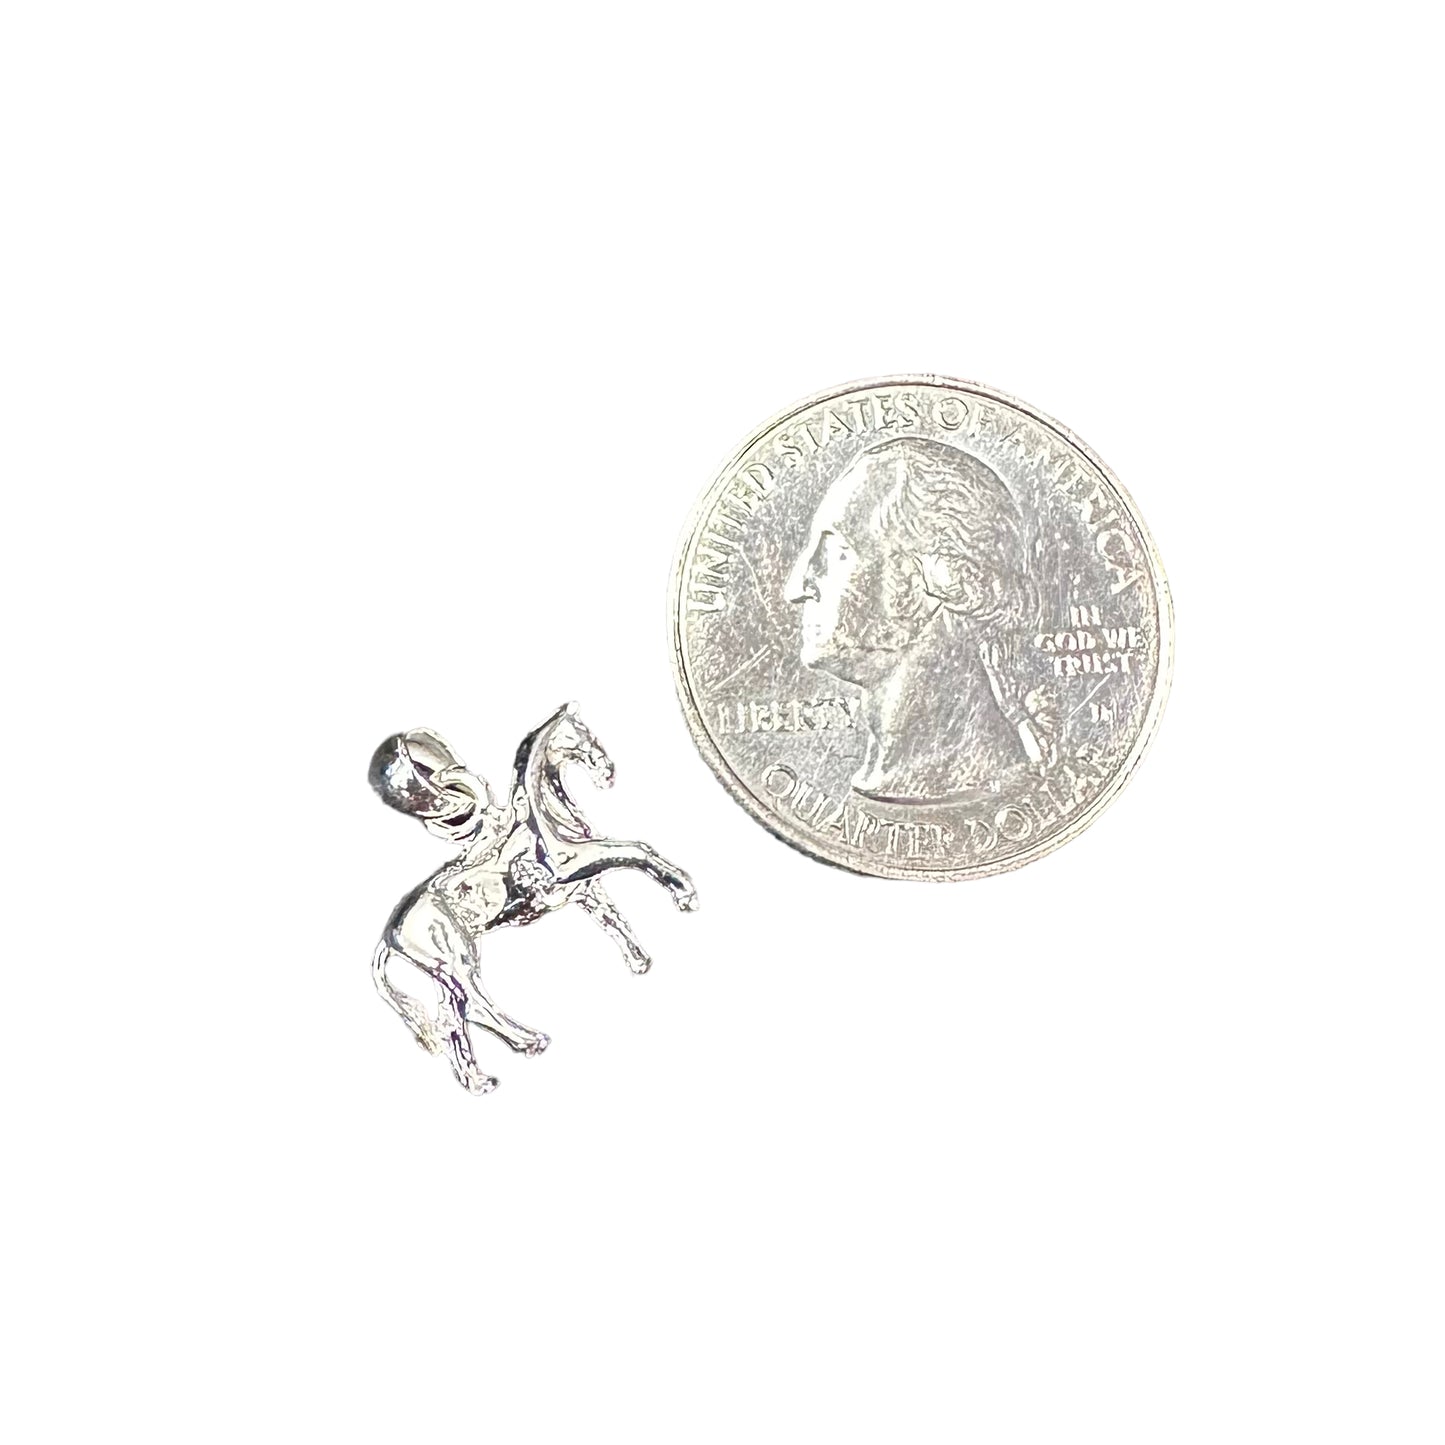 Horse Charm Pendant Sterling Silver